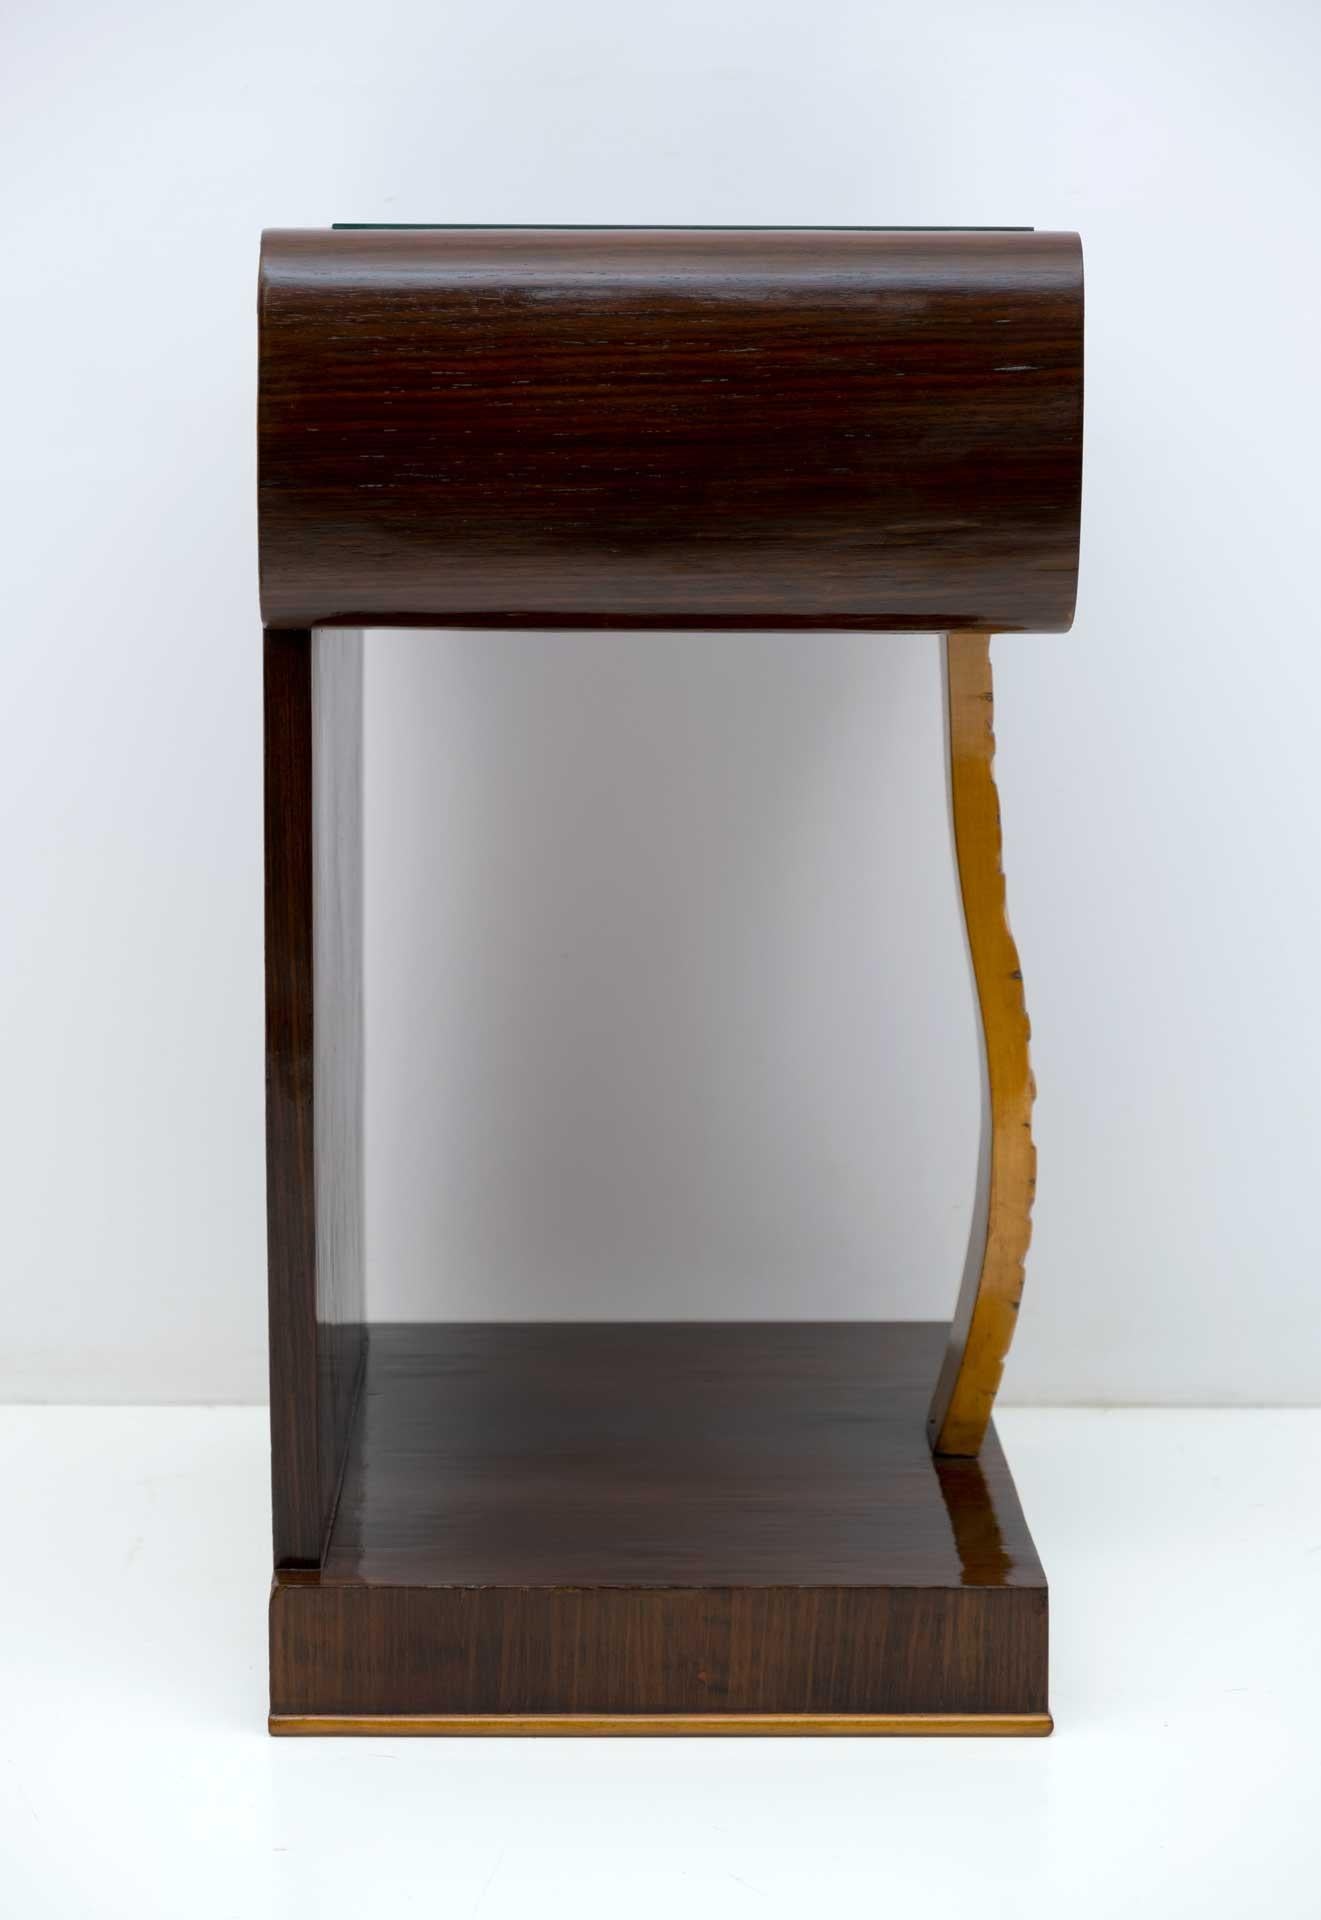 Pair of Art Deco Italian Walnut Briar and Maple Bedside Tables, 1920s For Sale 4